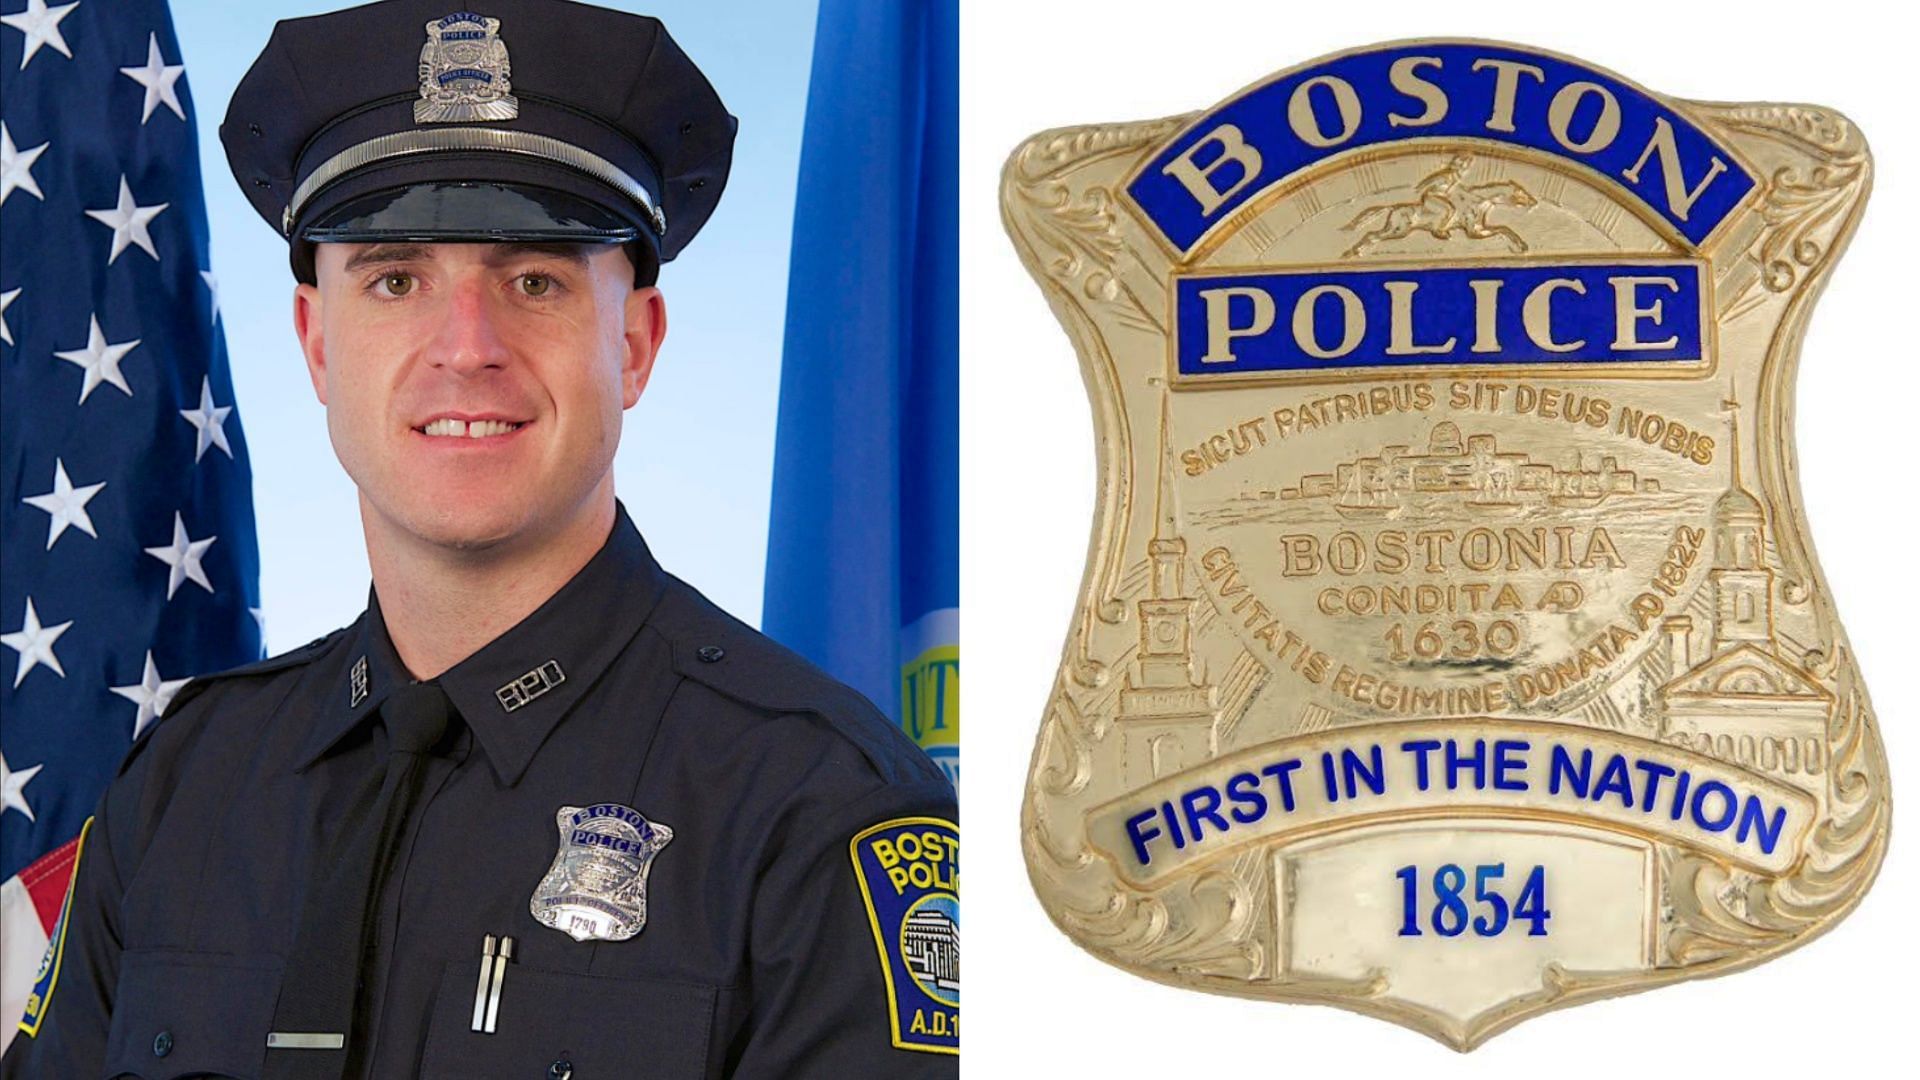 Pierce Fitzgerald Norton died at the age of 38. (Image via Facebook/Boston Police Department (Official))